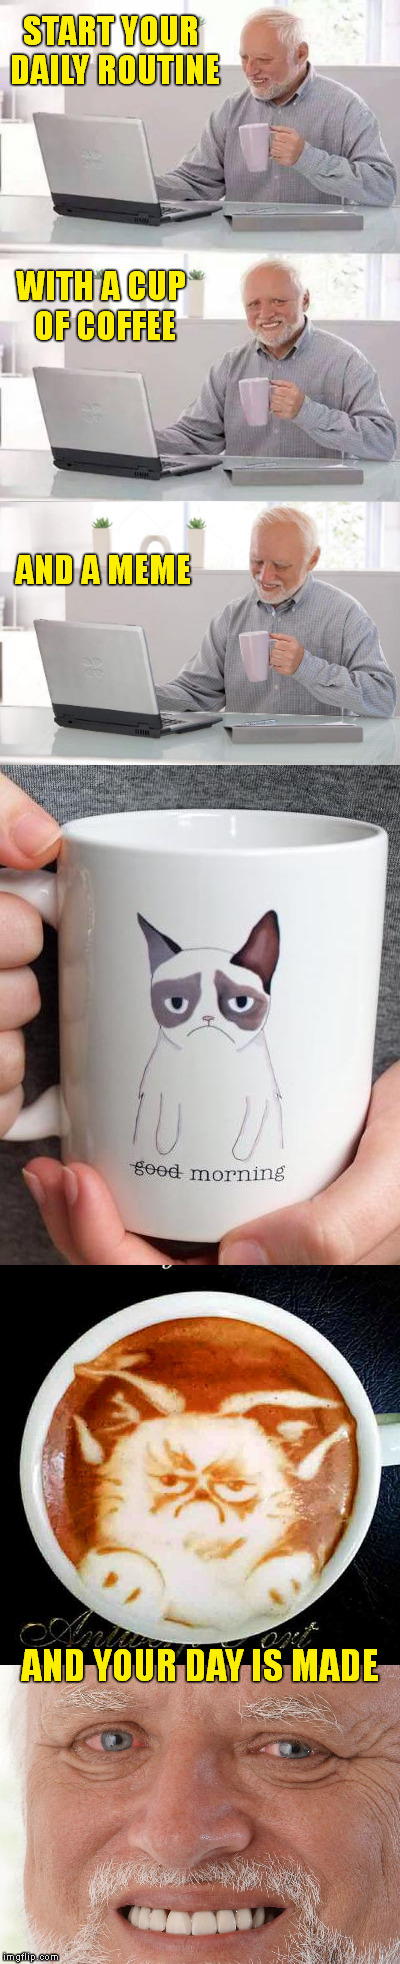 Have a nice day  ! | START YOUR DAILY ROUTINE; WITH A CUP OF COFFEE; AND A MEME; AND YOUR DAY IS MADE | image tagged in hide the pain harold,breakfast,grumpy cat coffee cup,memes,cat doesn't like this coffee,made my day | made w/ Imgflip meme maker